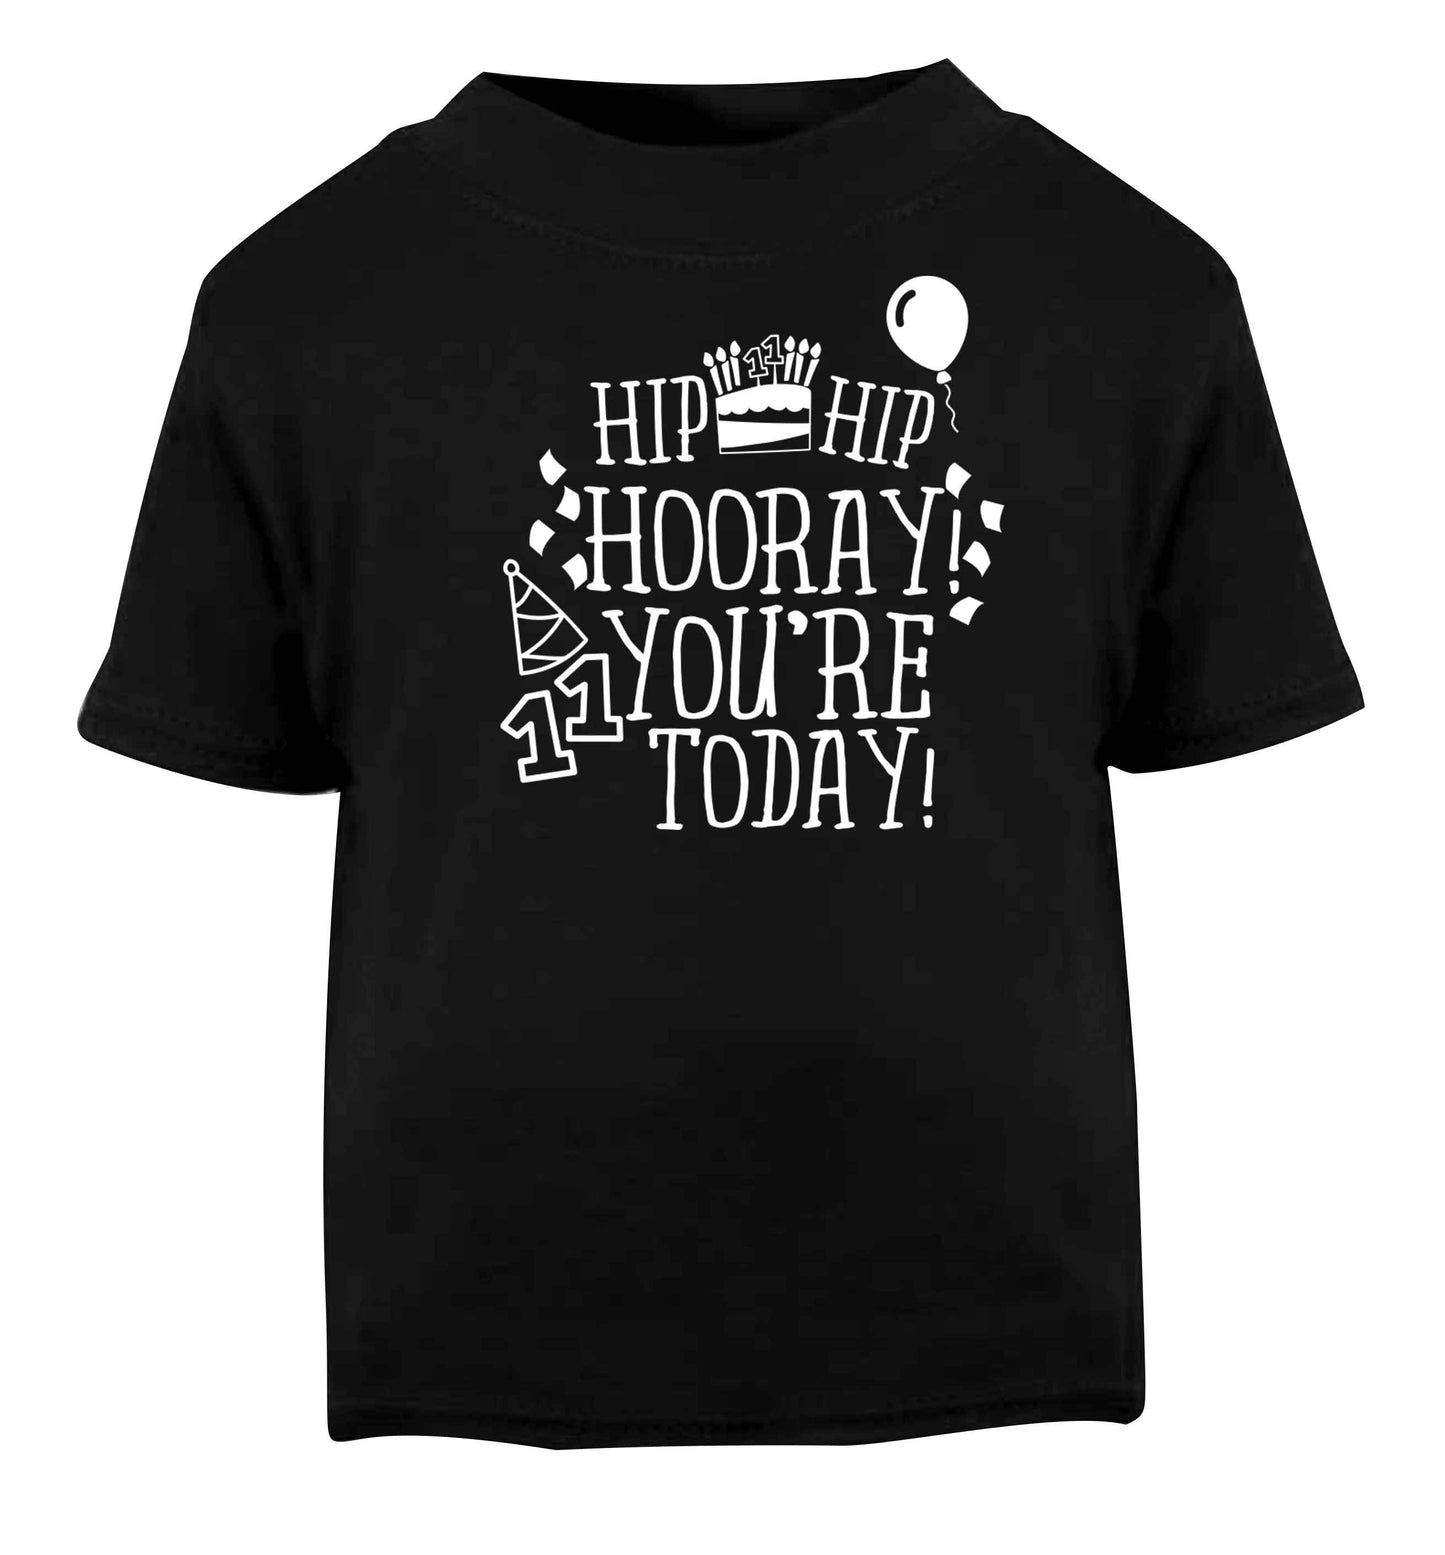 Hip hip hooray I you're eleven today! Black baby toddler Tshirt 2 years